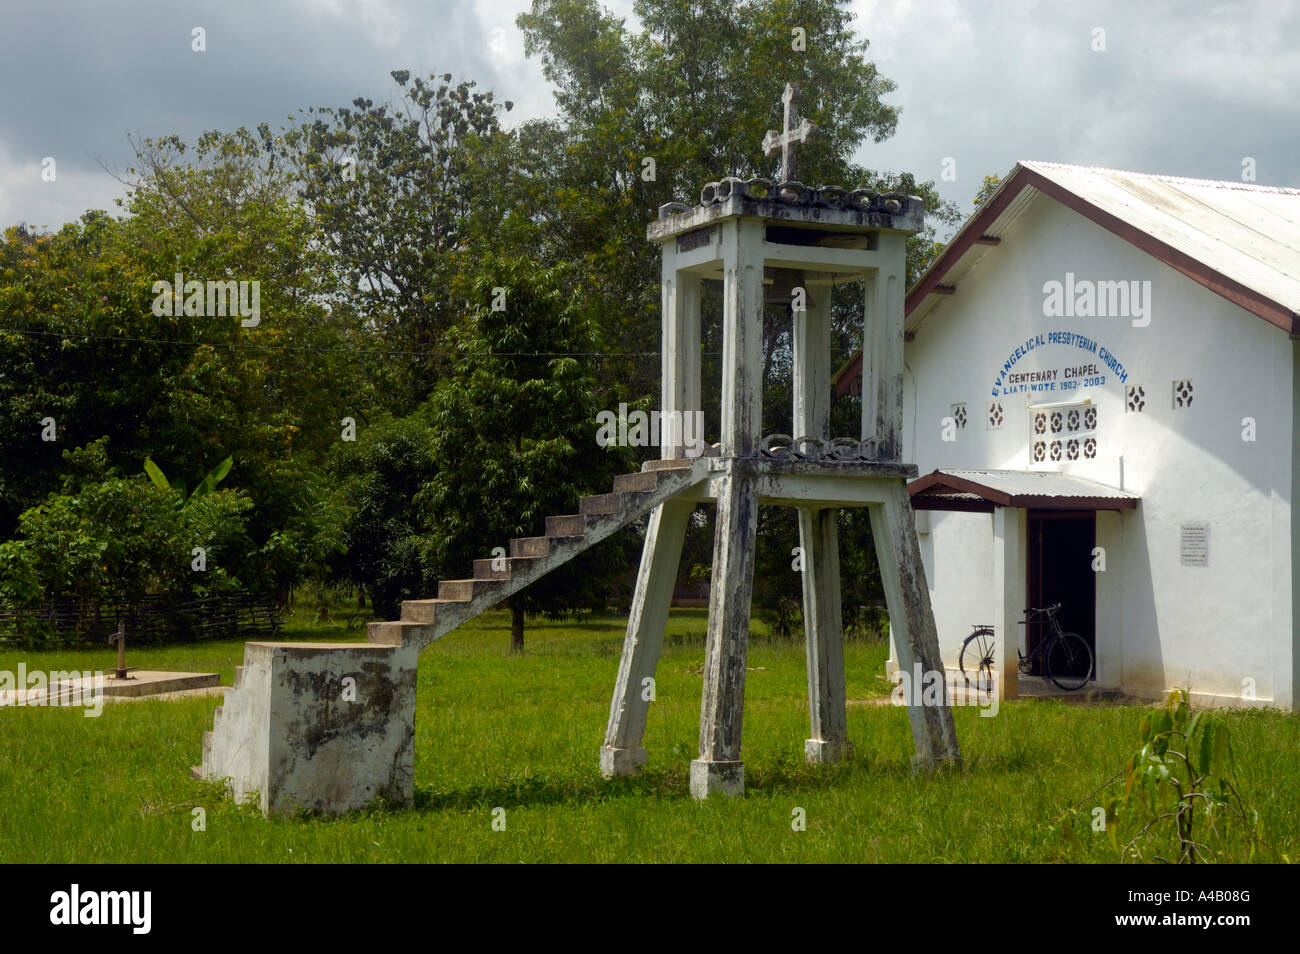 Village church with bell tower and cross in Liati Wote near Hohoe, Ghana, Africa Stock Photo